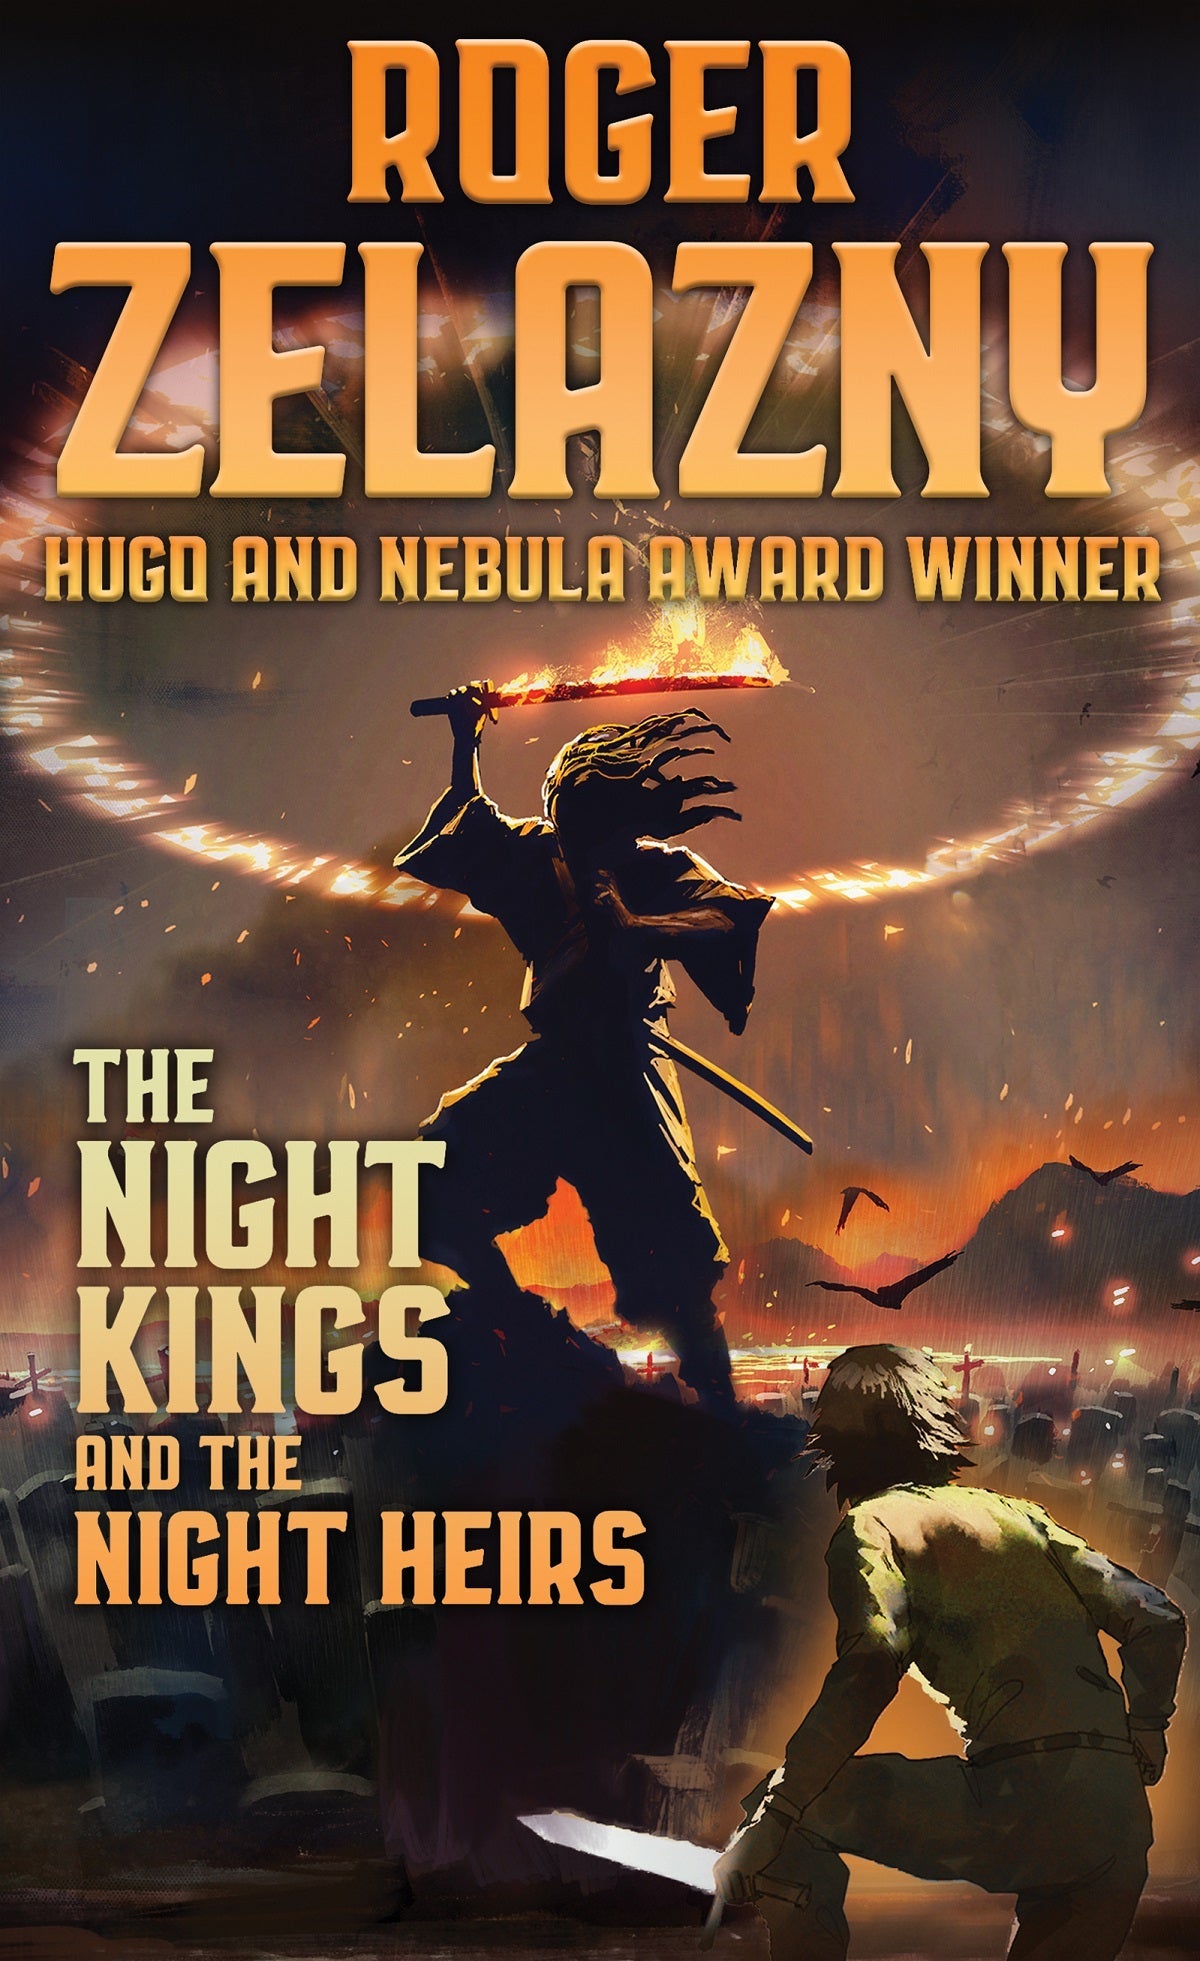 Cover art for The Night Kings and Night Heirs.